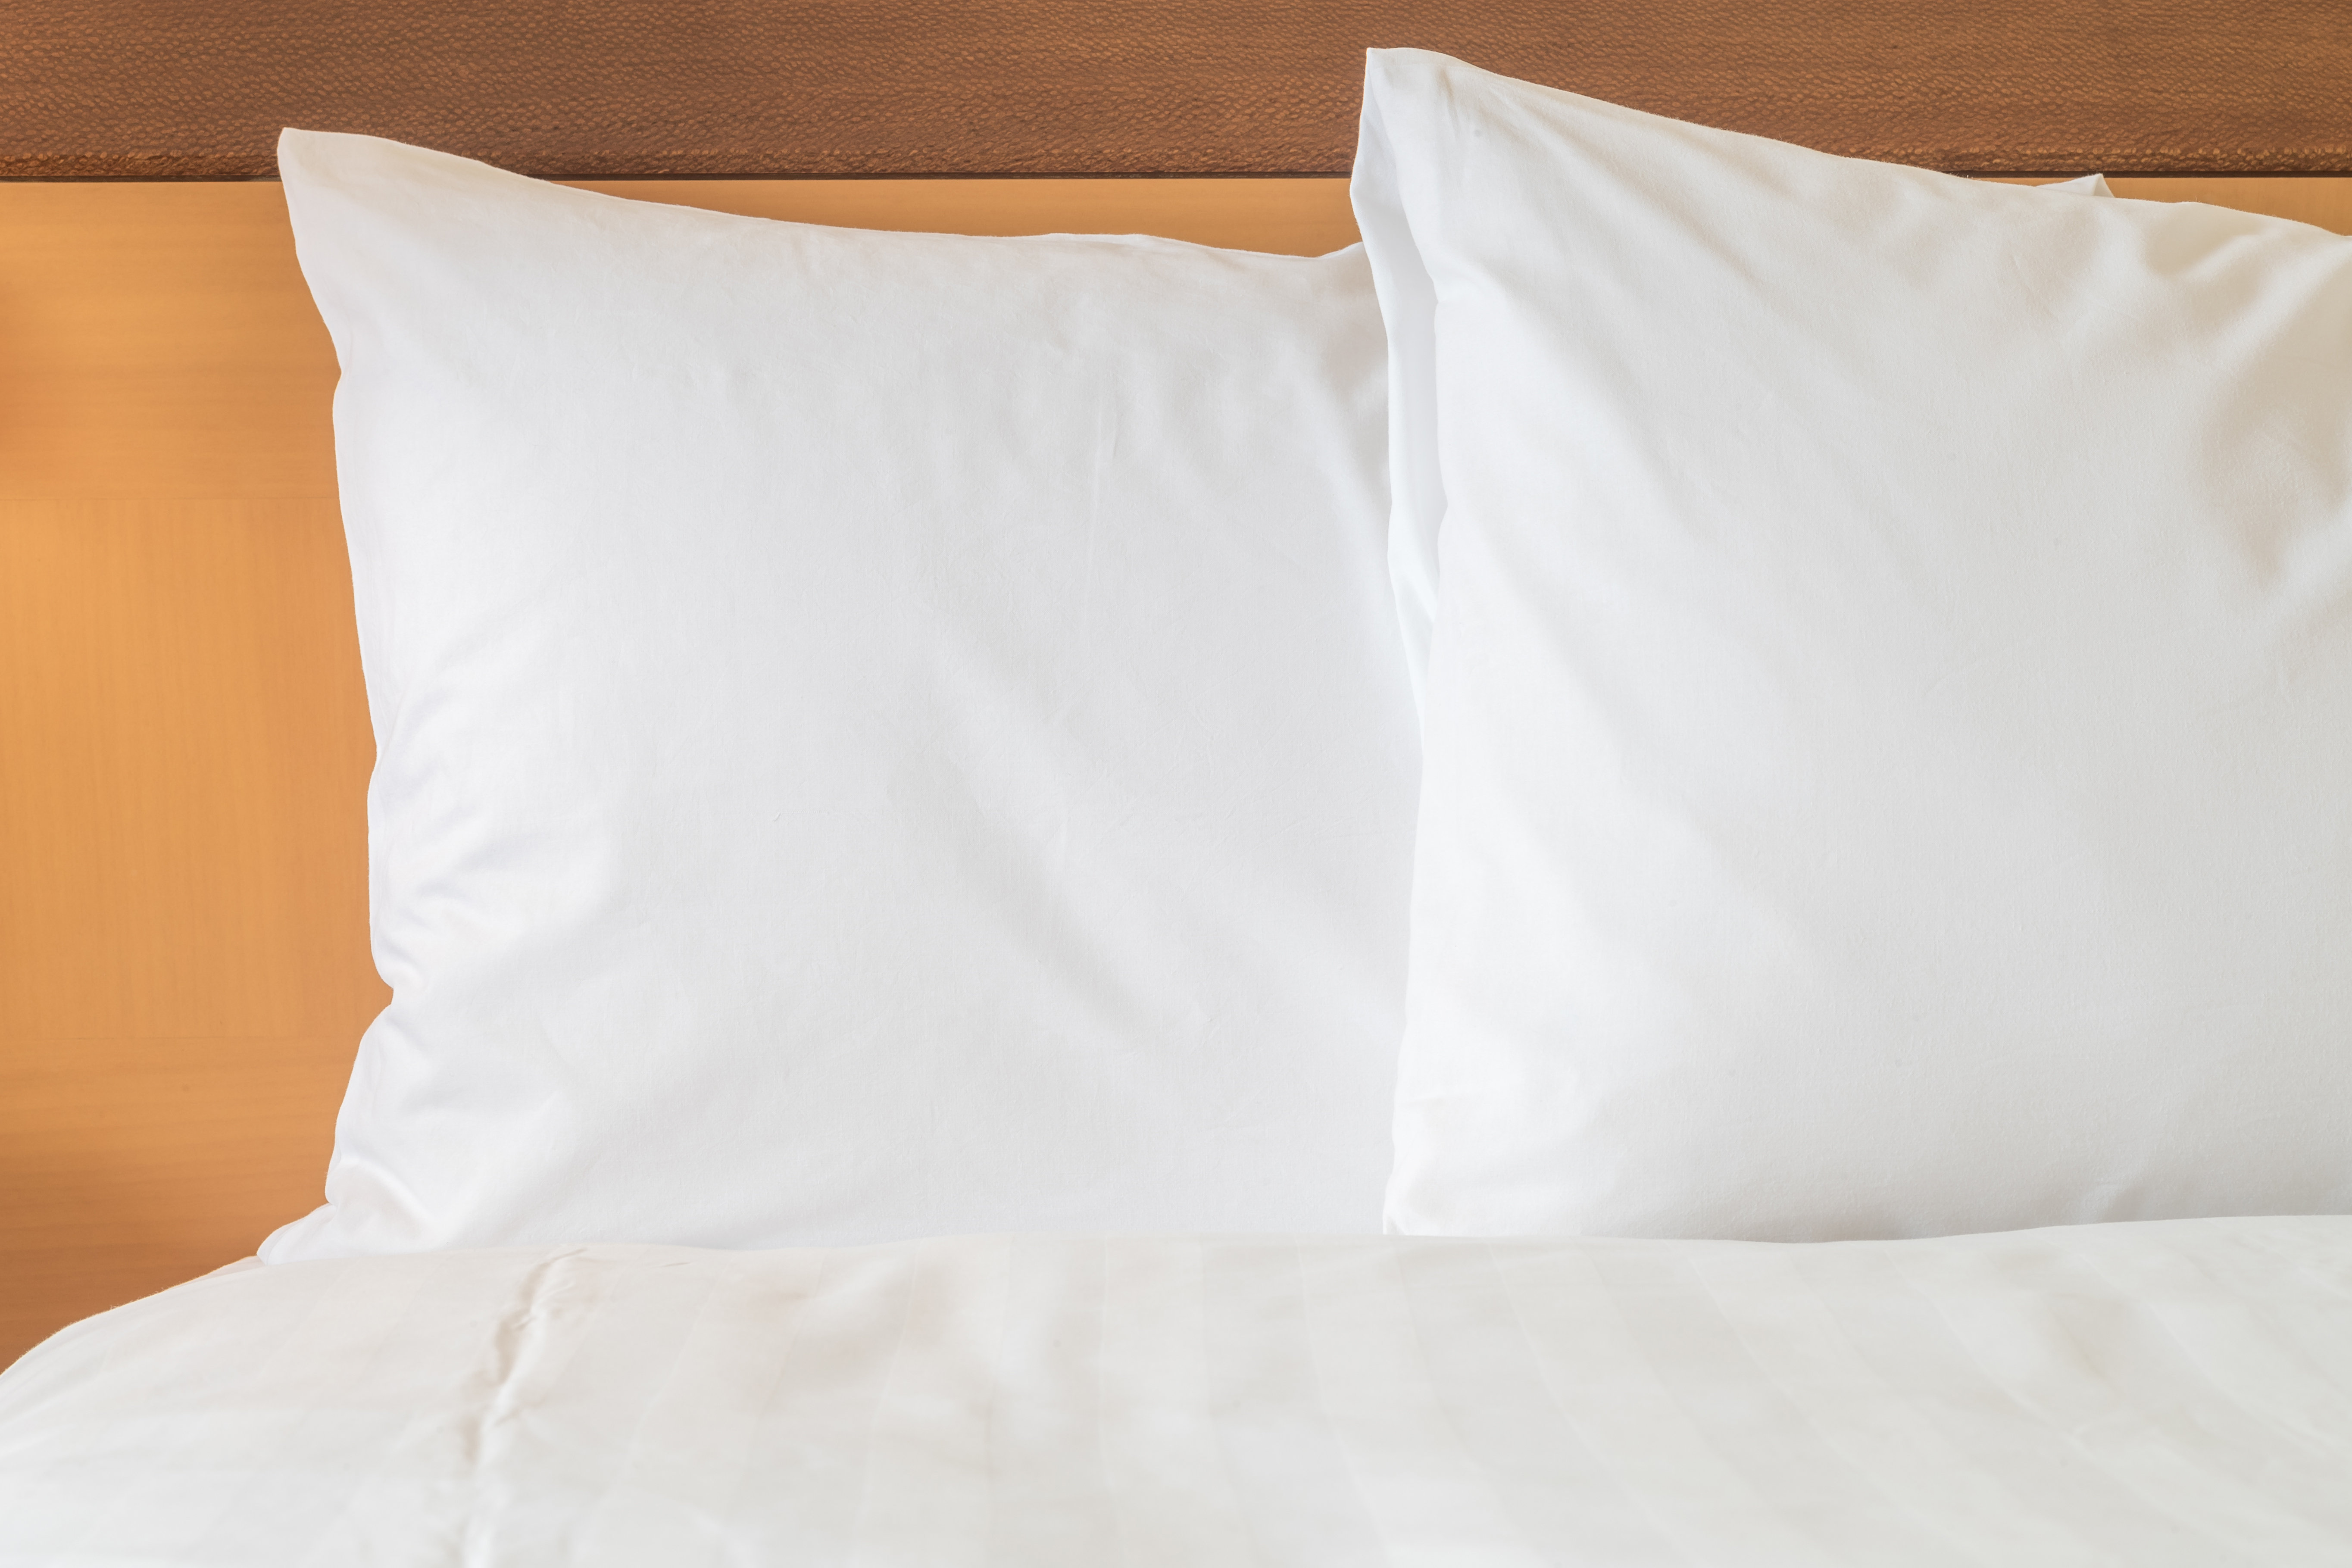 A Choice of Soft and Firm Pillows